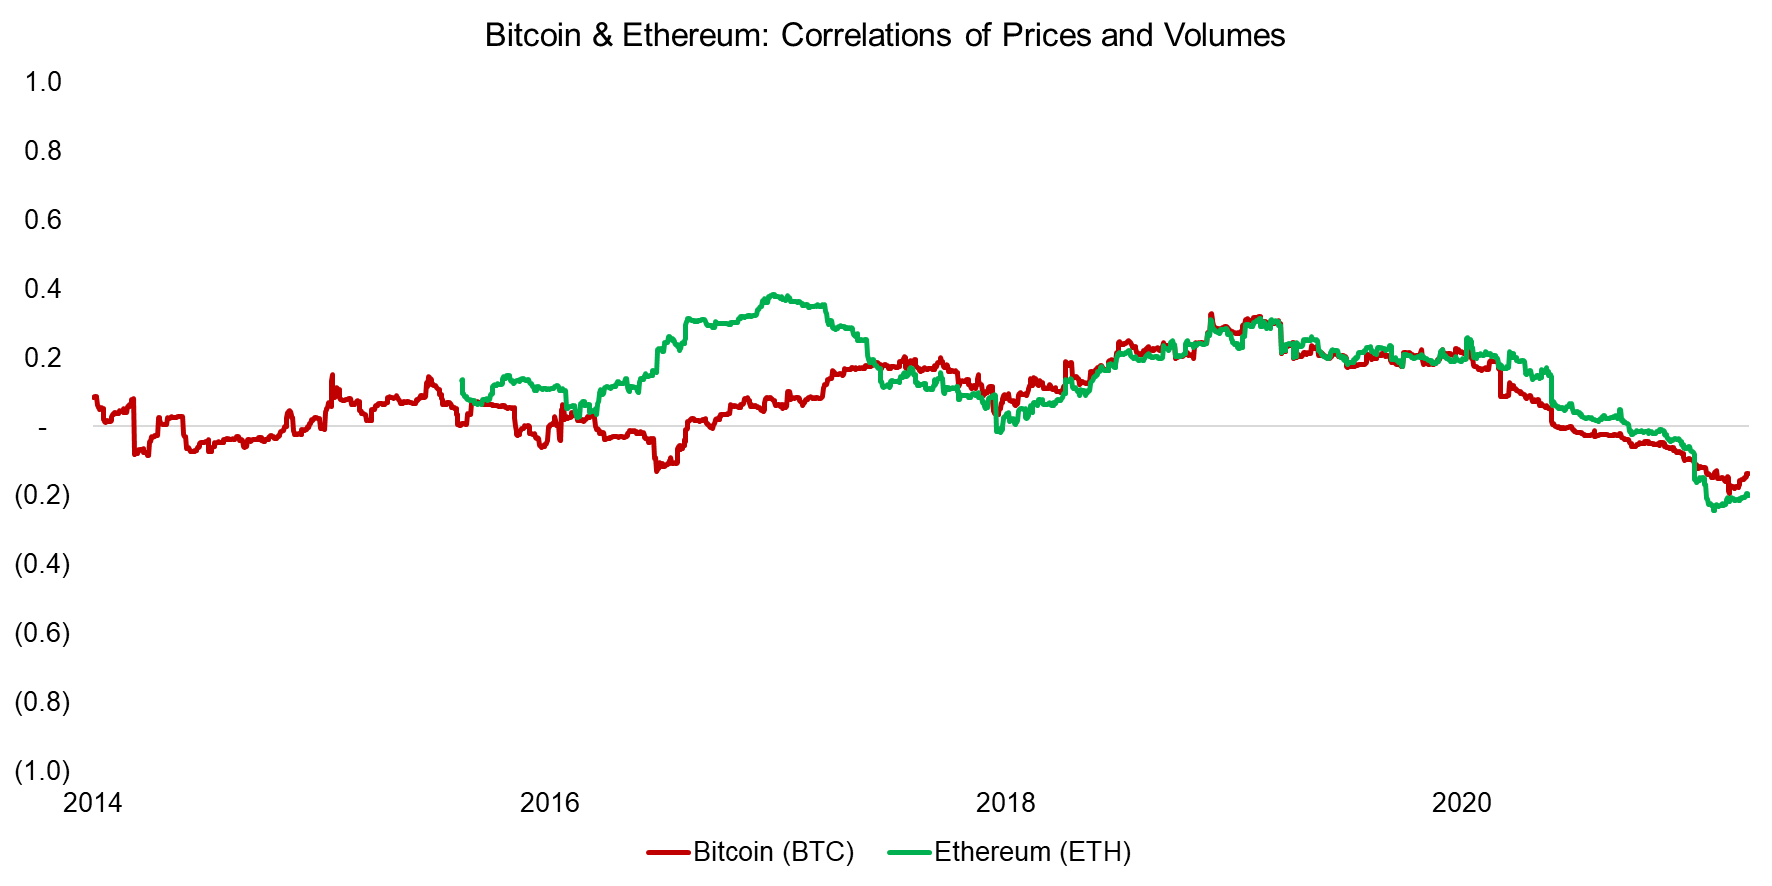 Bitcoin & Ethereum Correlations of Prices and Volumes